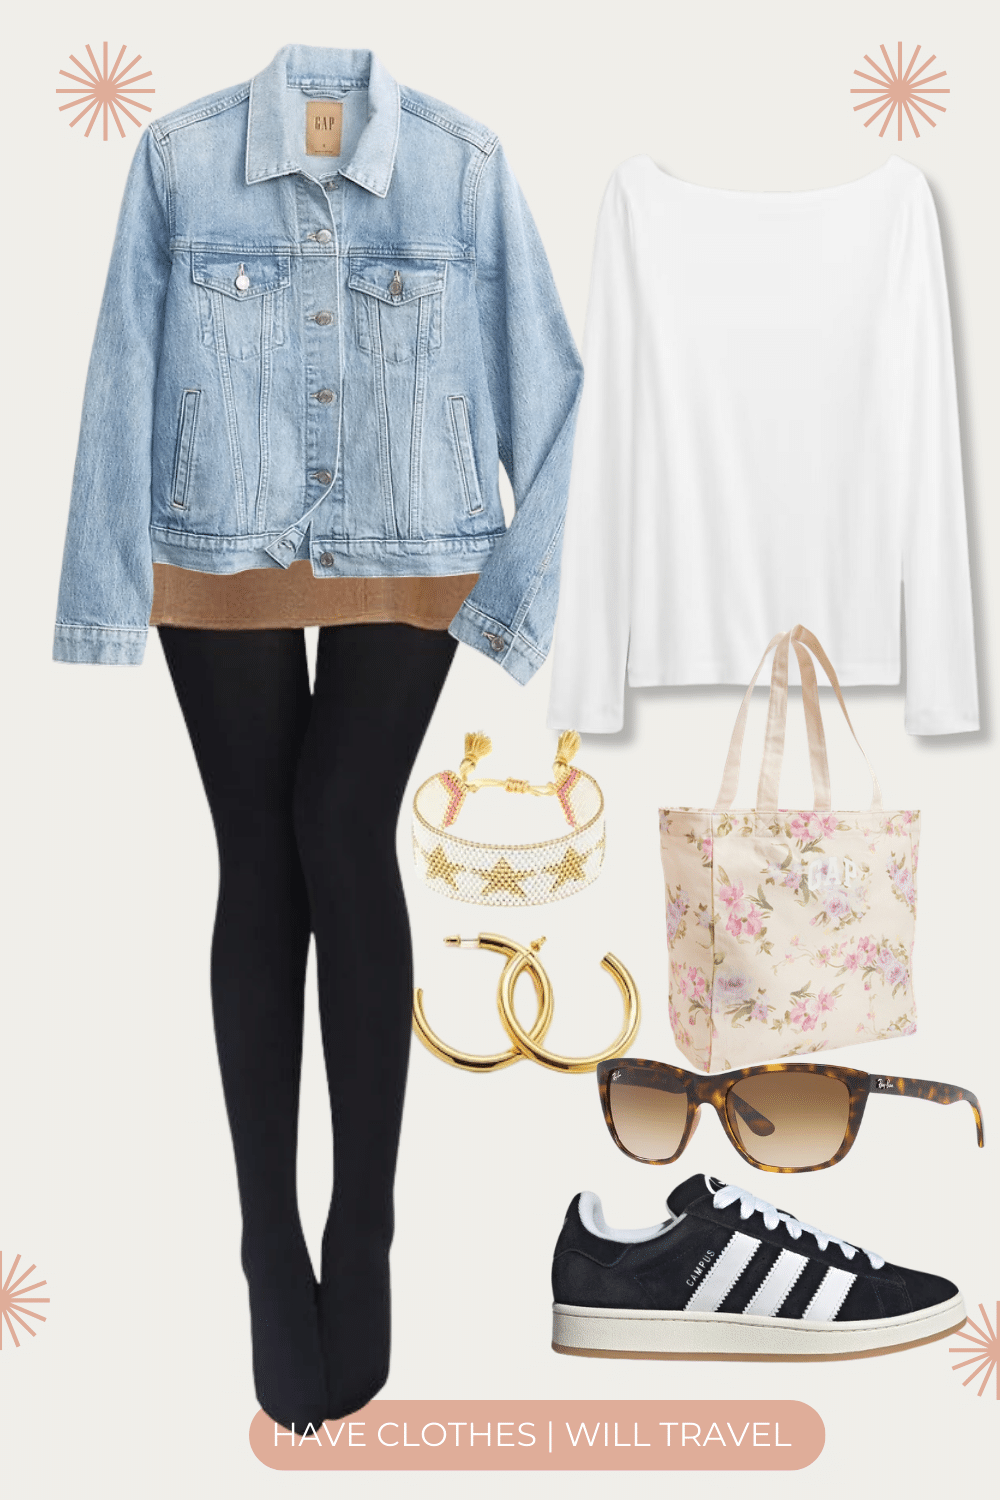 A black tights outfit idea featuring a jean jacket, sneakers and long shirt